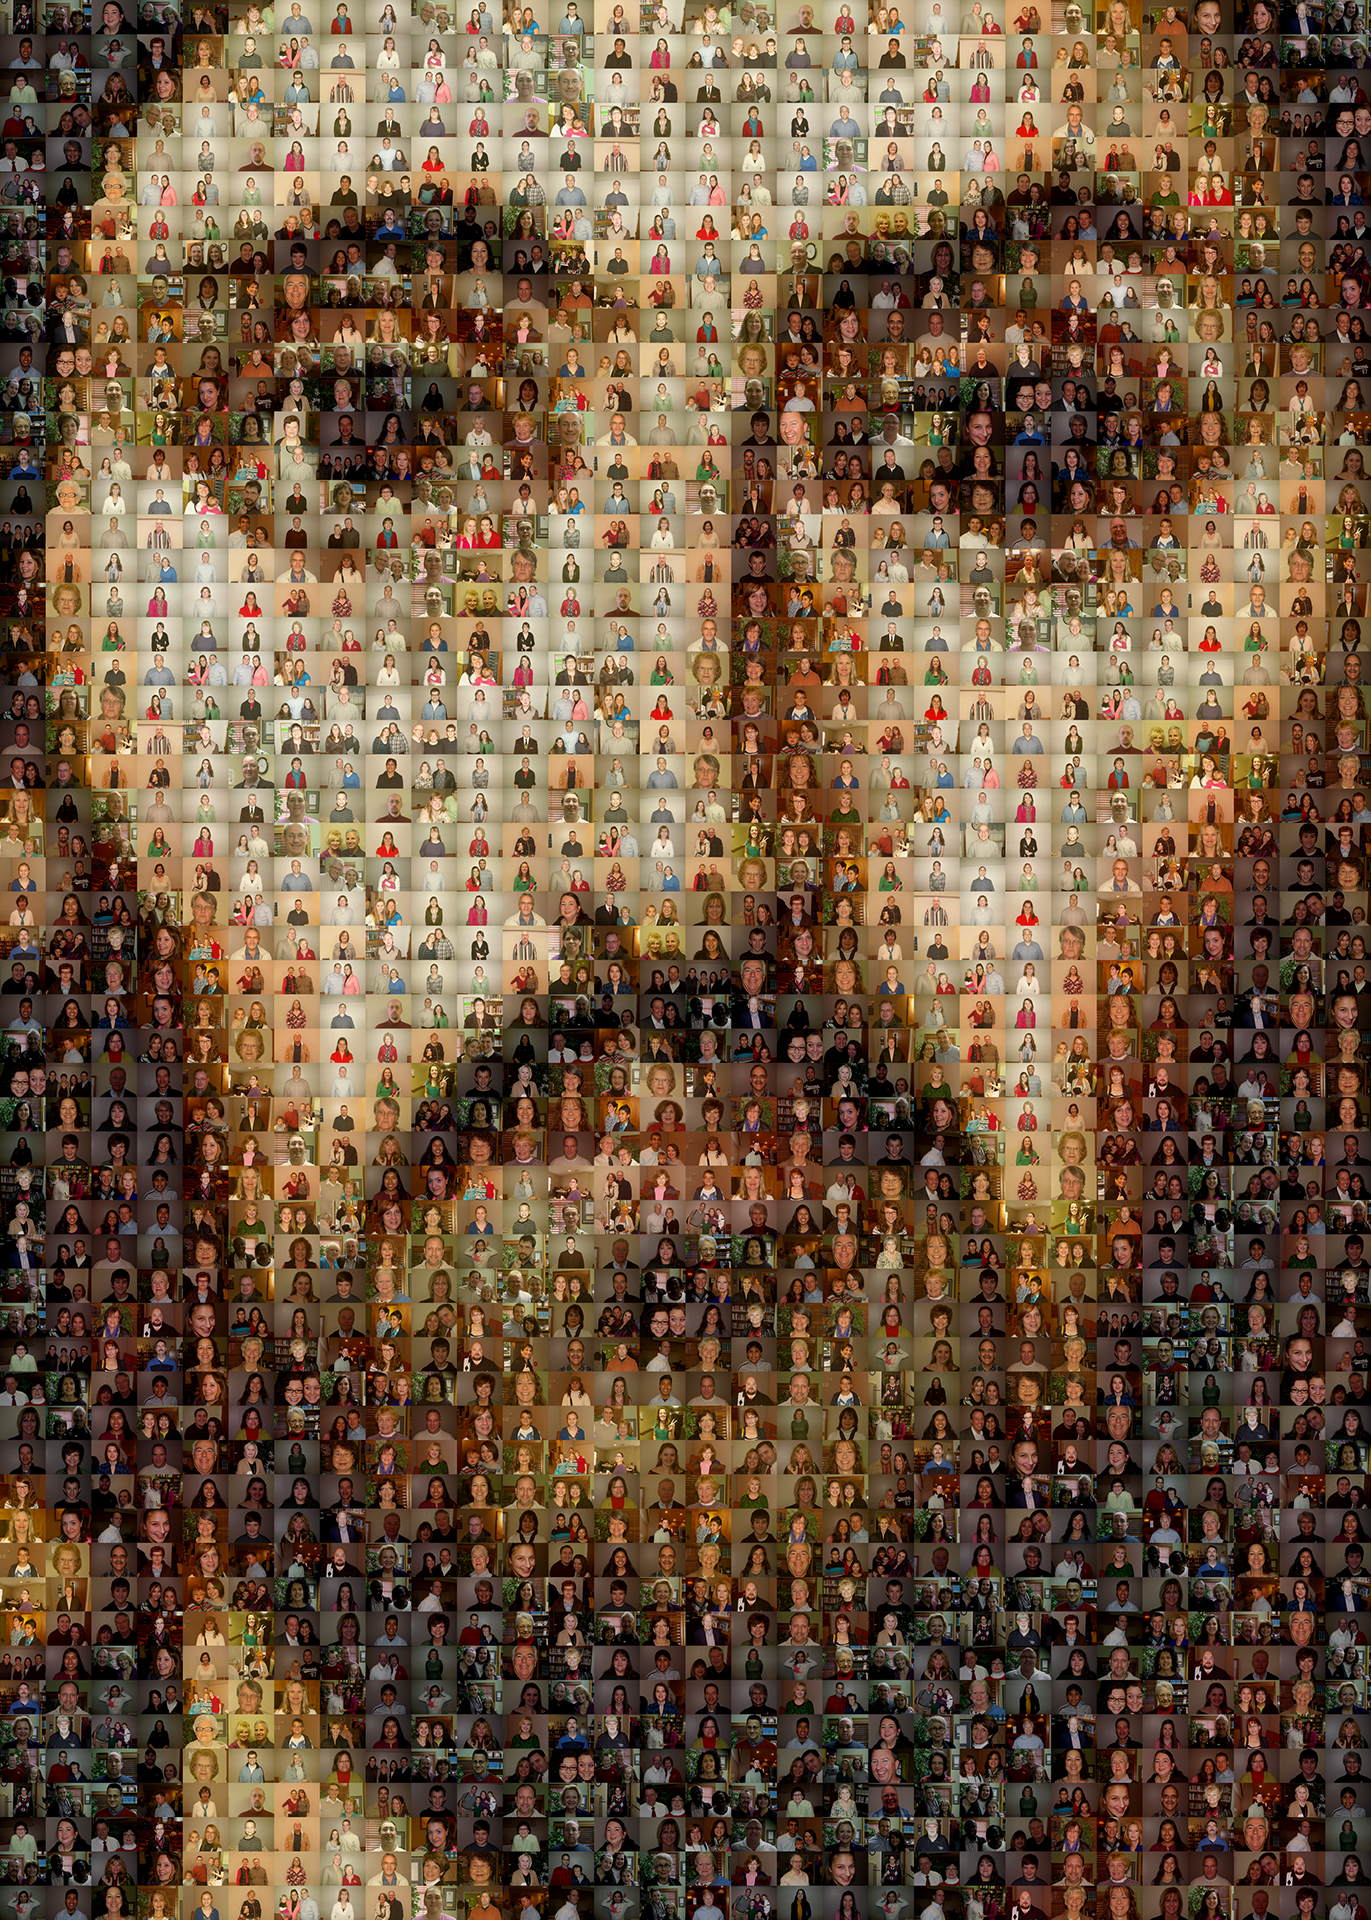 photo mosaic 237 community photos were collected to create this mosaic